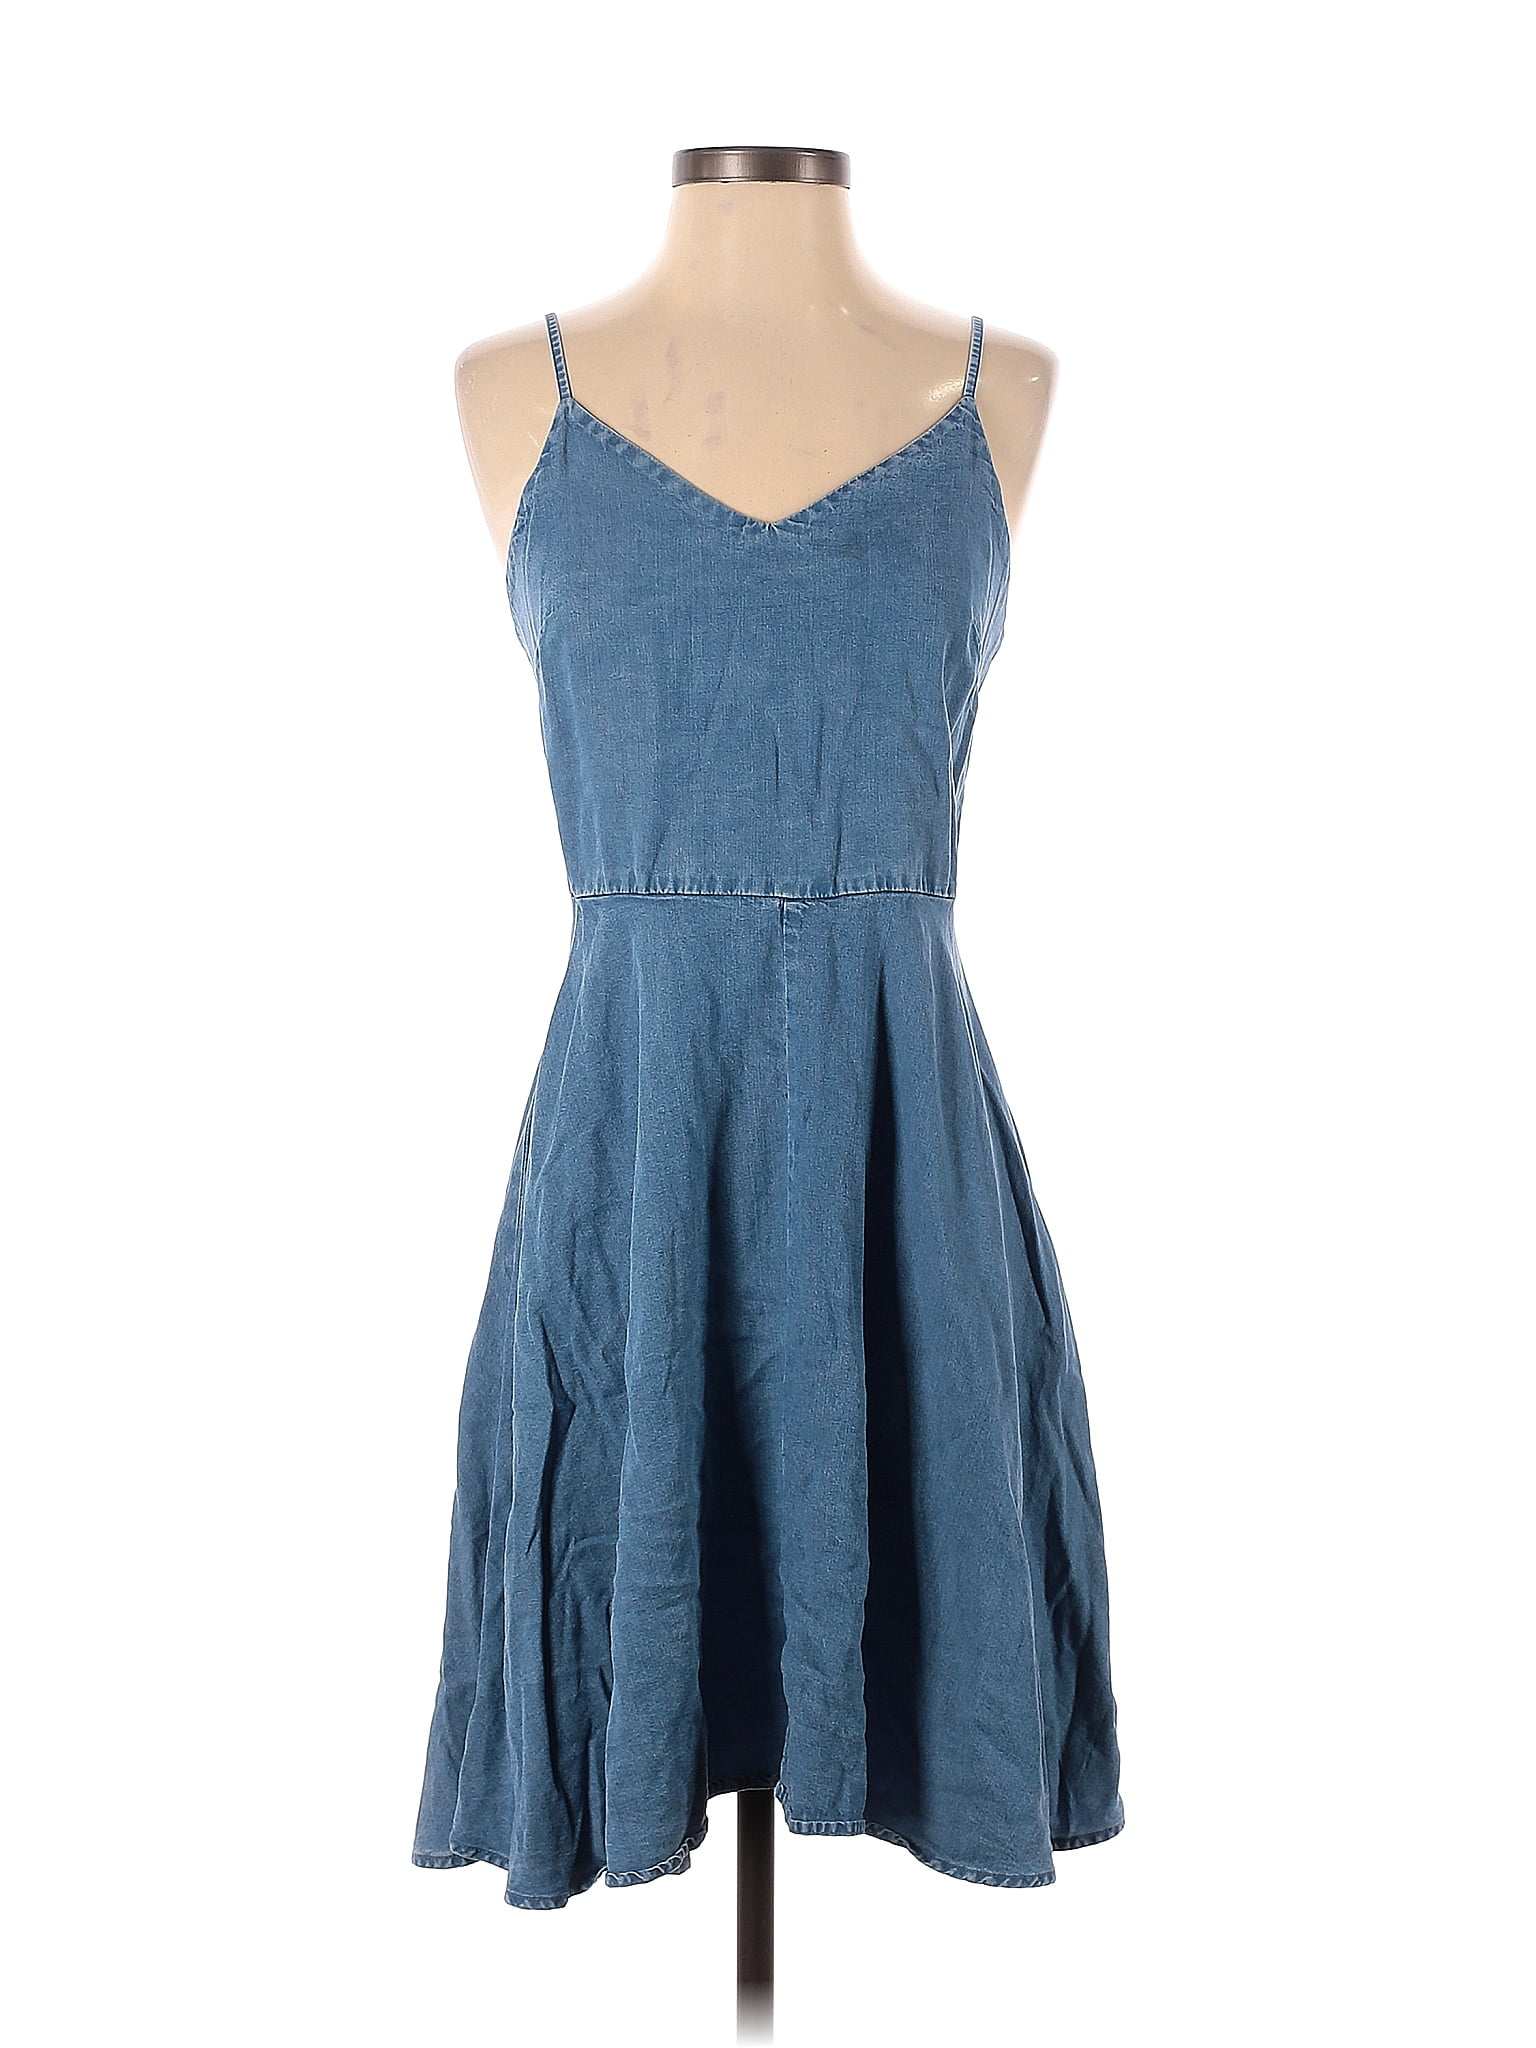 Gap 100% Lyocell Solid Blue Casual Dress Size S - 69% off | thredUP